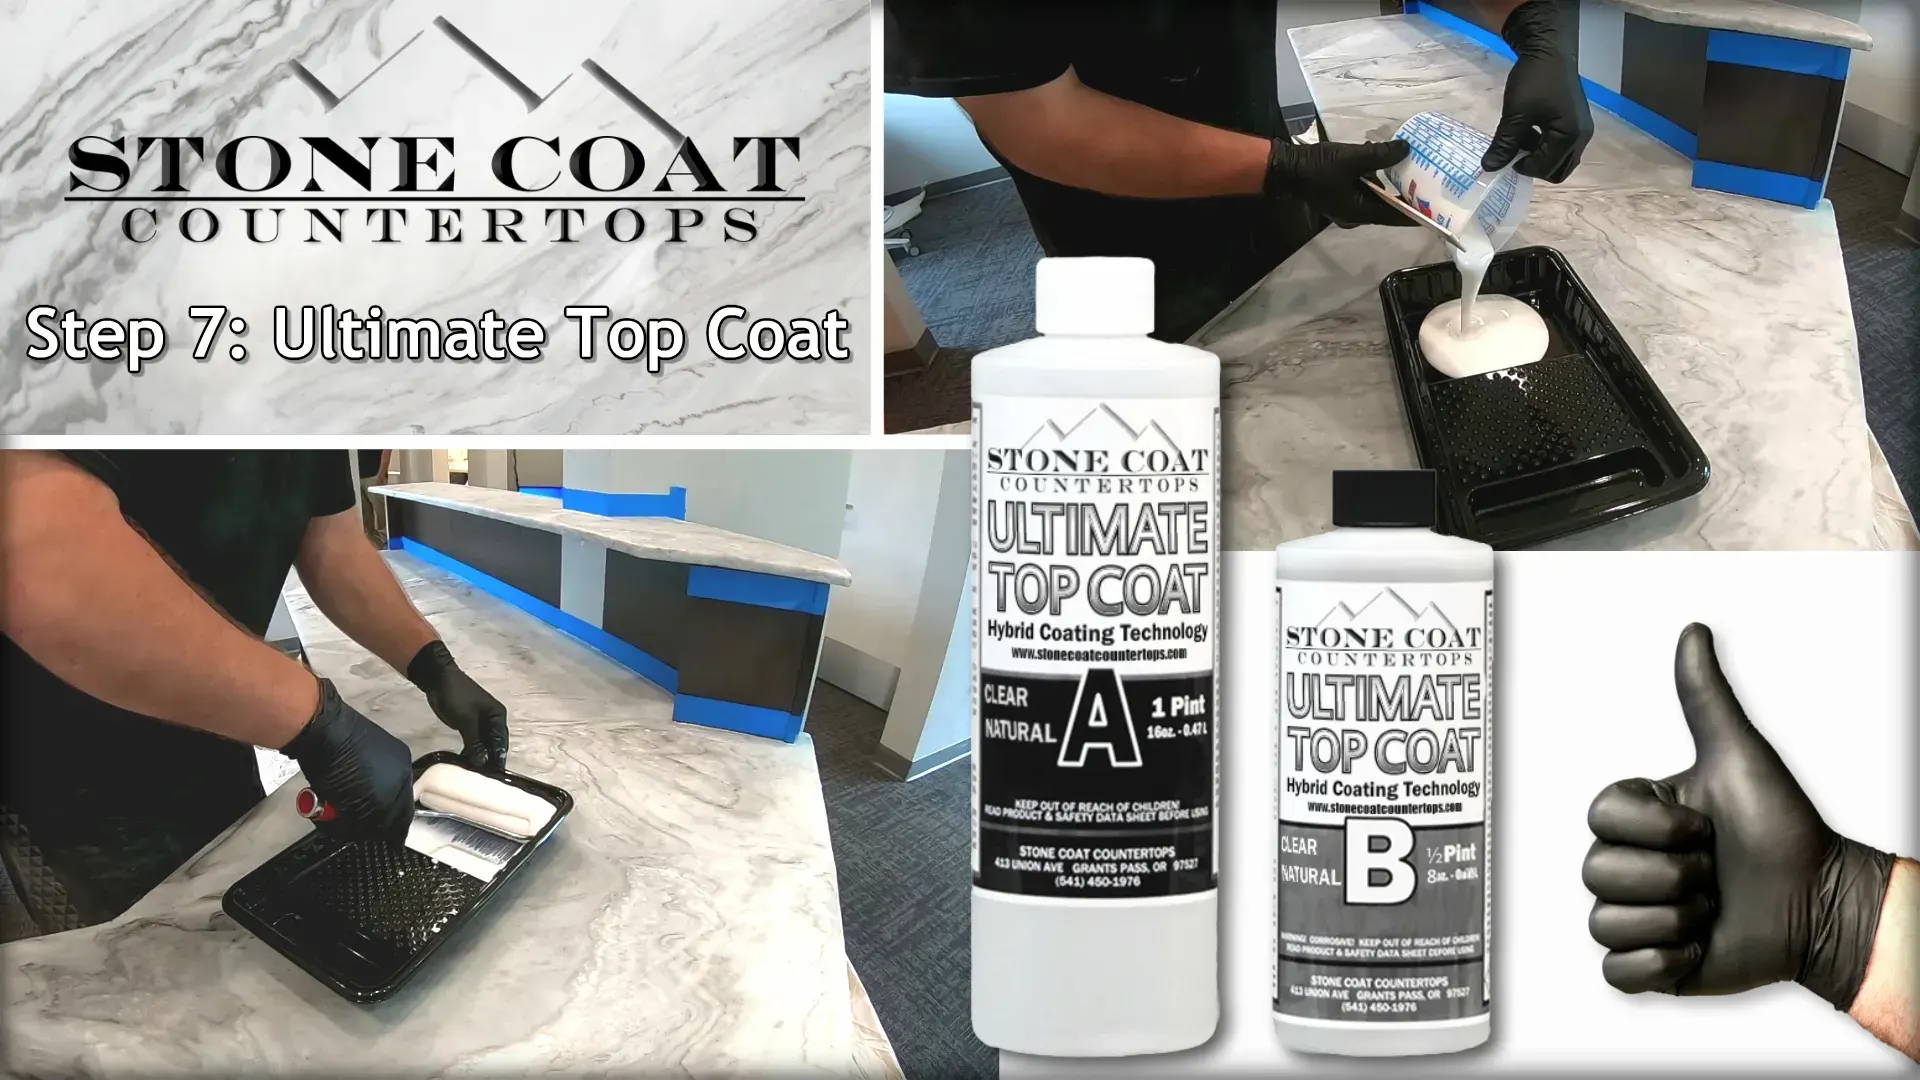 Optimal choice for ultimate scratch resistance and natural sheen: Mix and apply Stone Coat Ultimate Top Coat. 